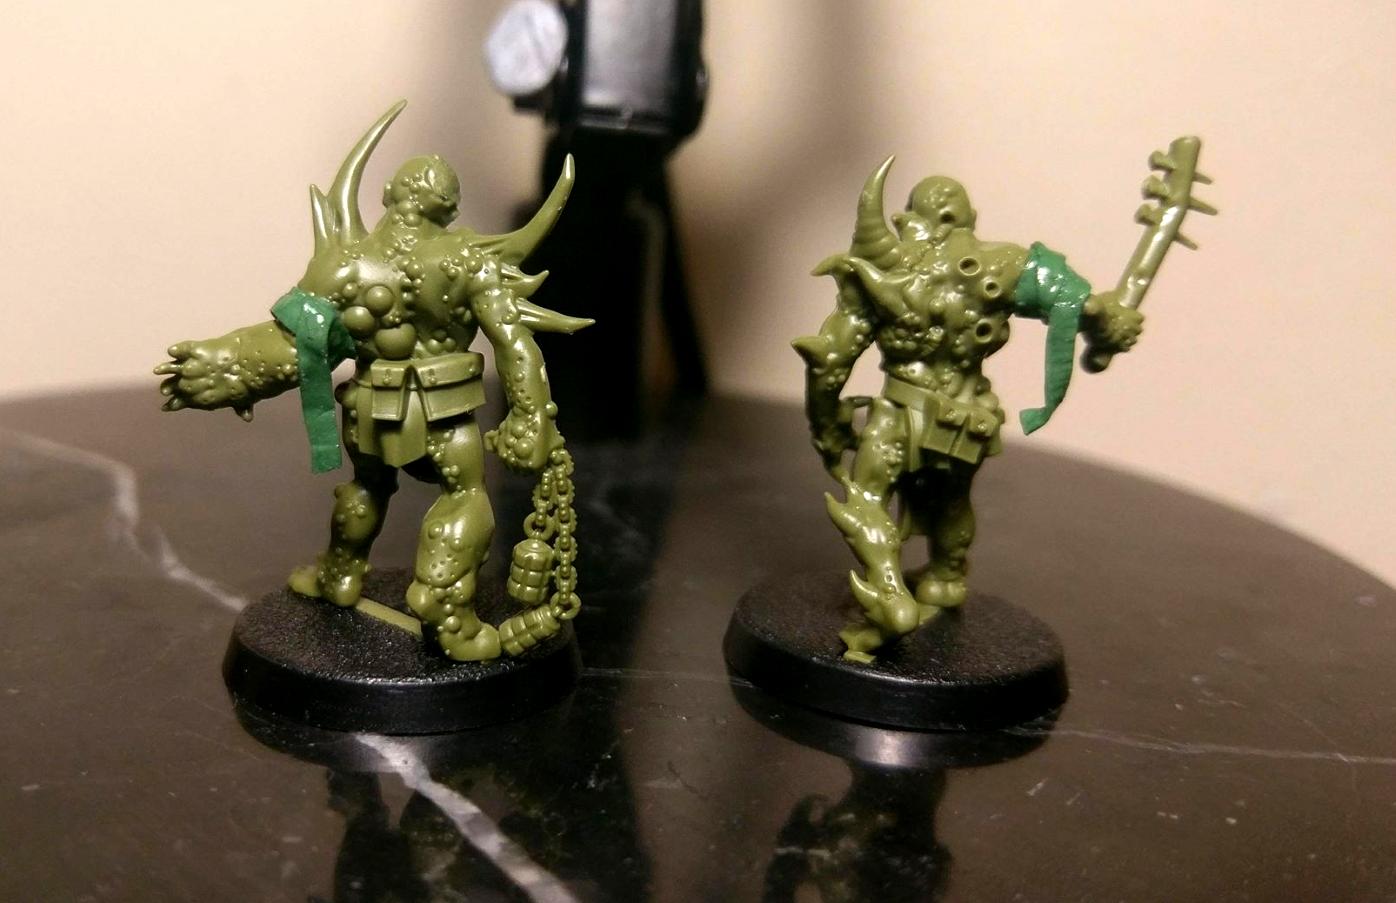 Breathers, Chaos, Coils, Conversion, Death Guard, Helmets, Masks, Nurgle, Pox Walker, Spikes, Tentacle, Warhammer 40,000